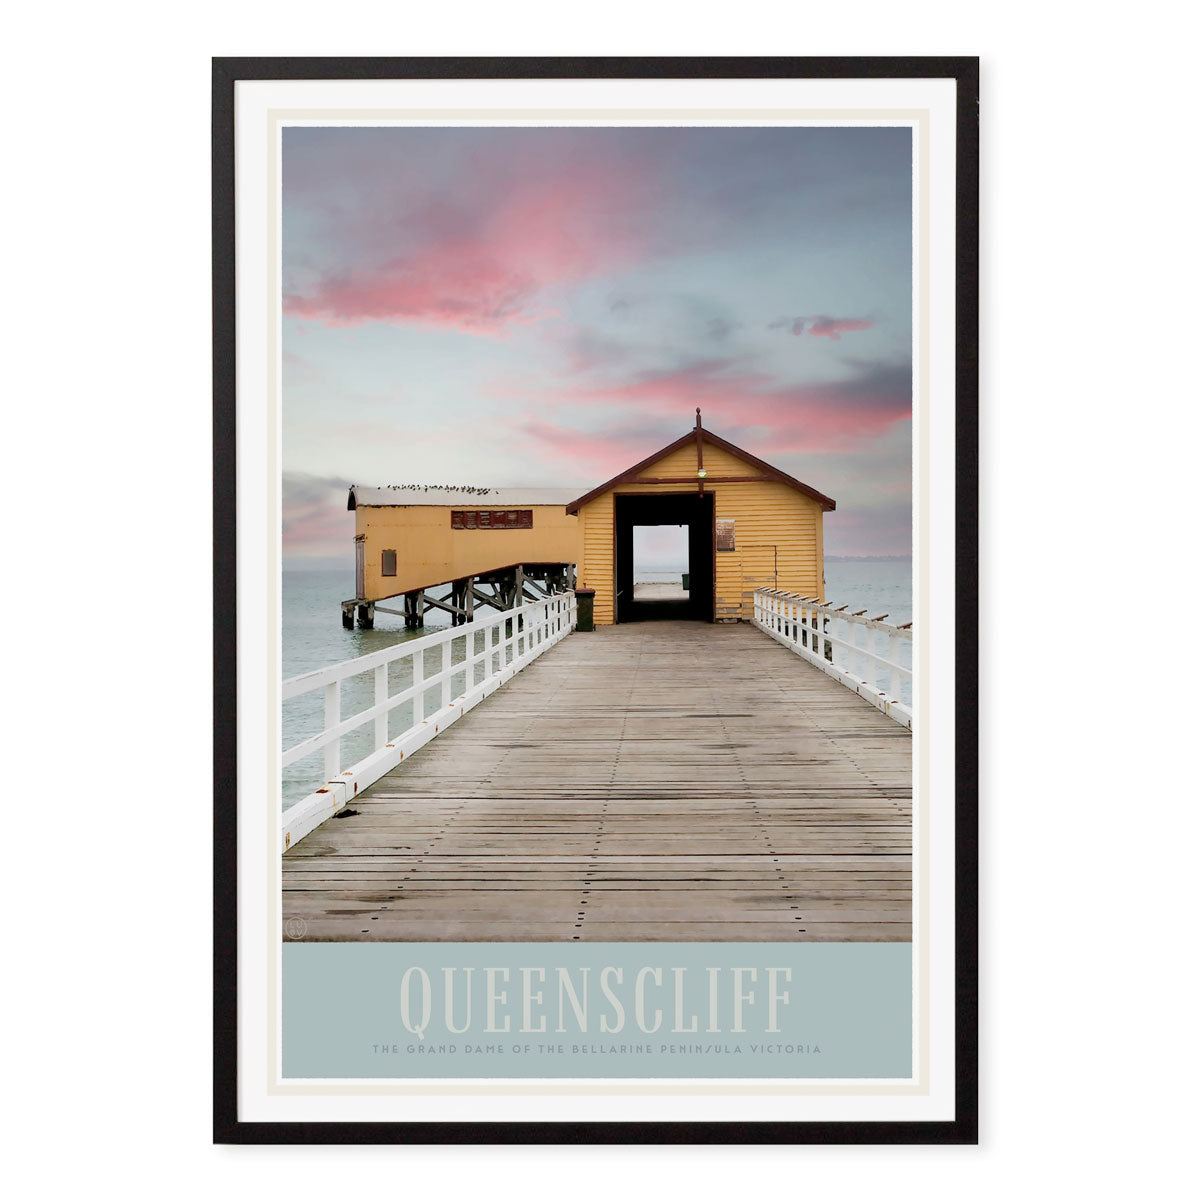 Queenscliff Victoria retro vintage travel poster print in black frame from Places We Luv